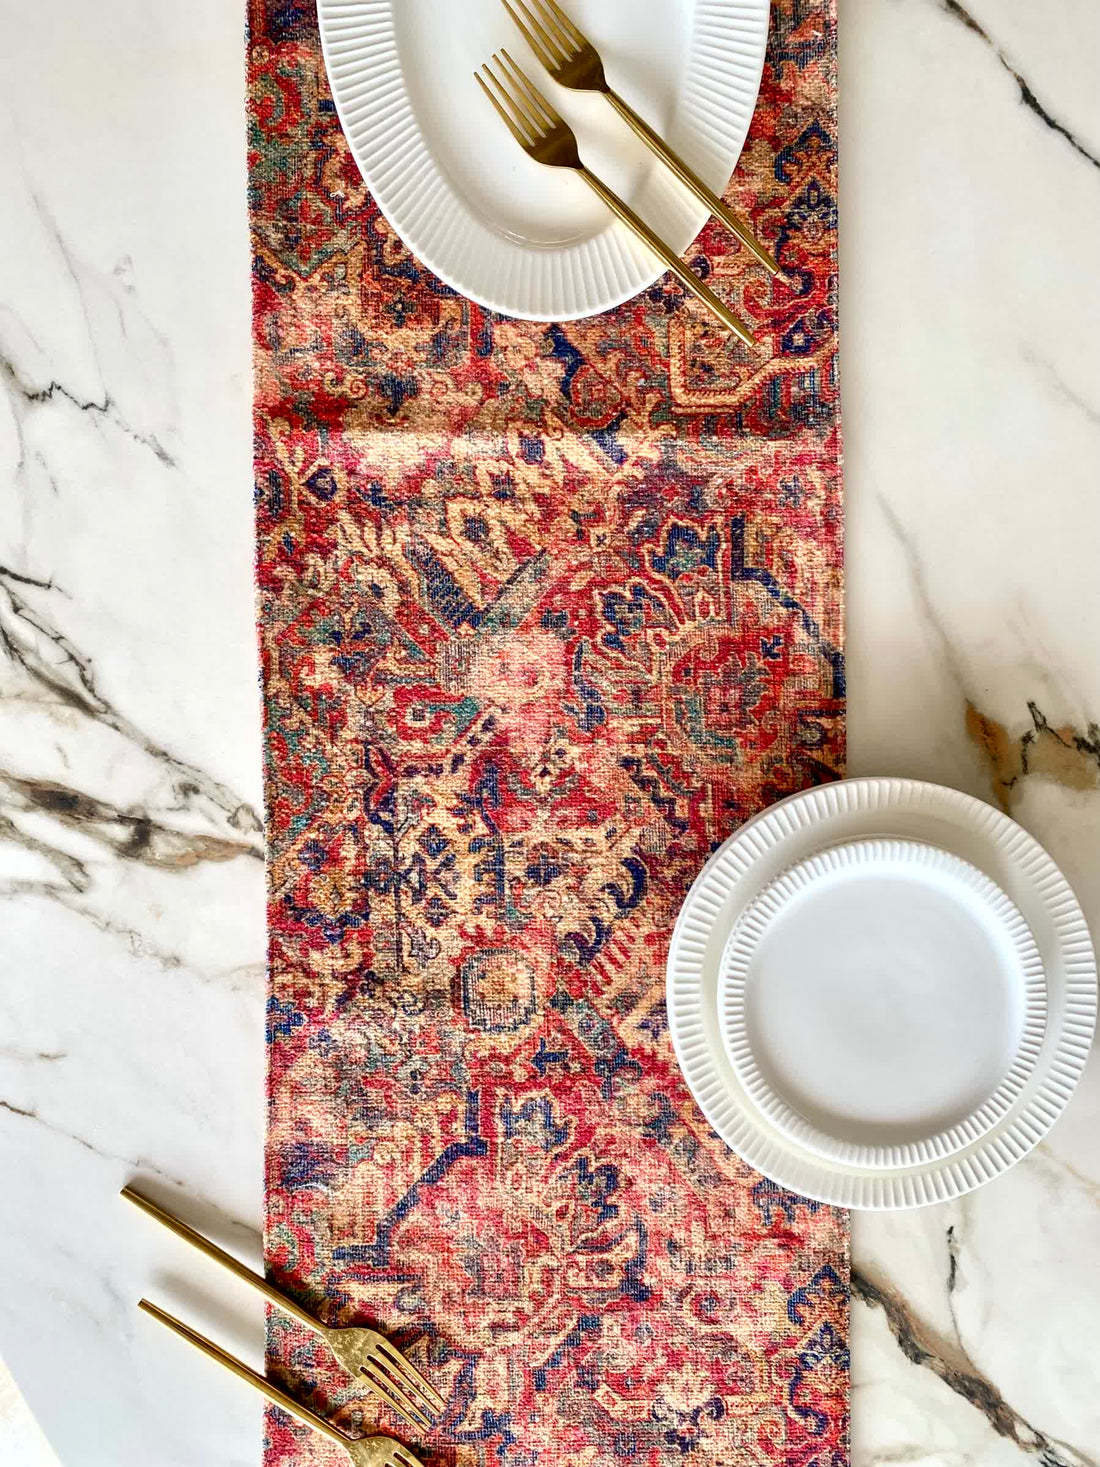 Abstract Printed Table Runner - Red